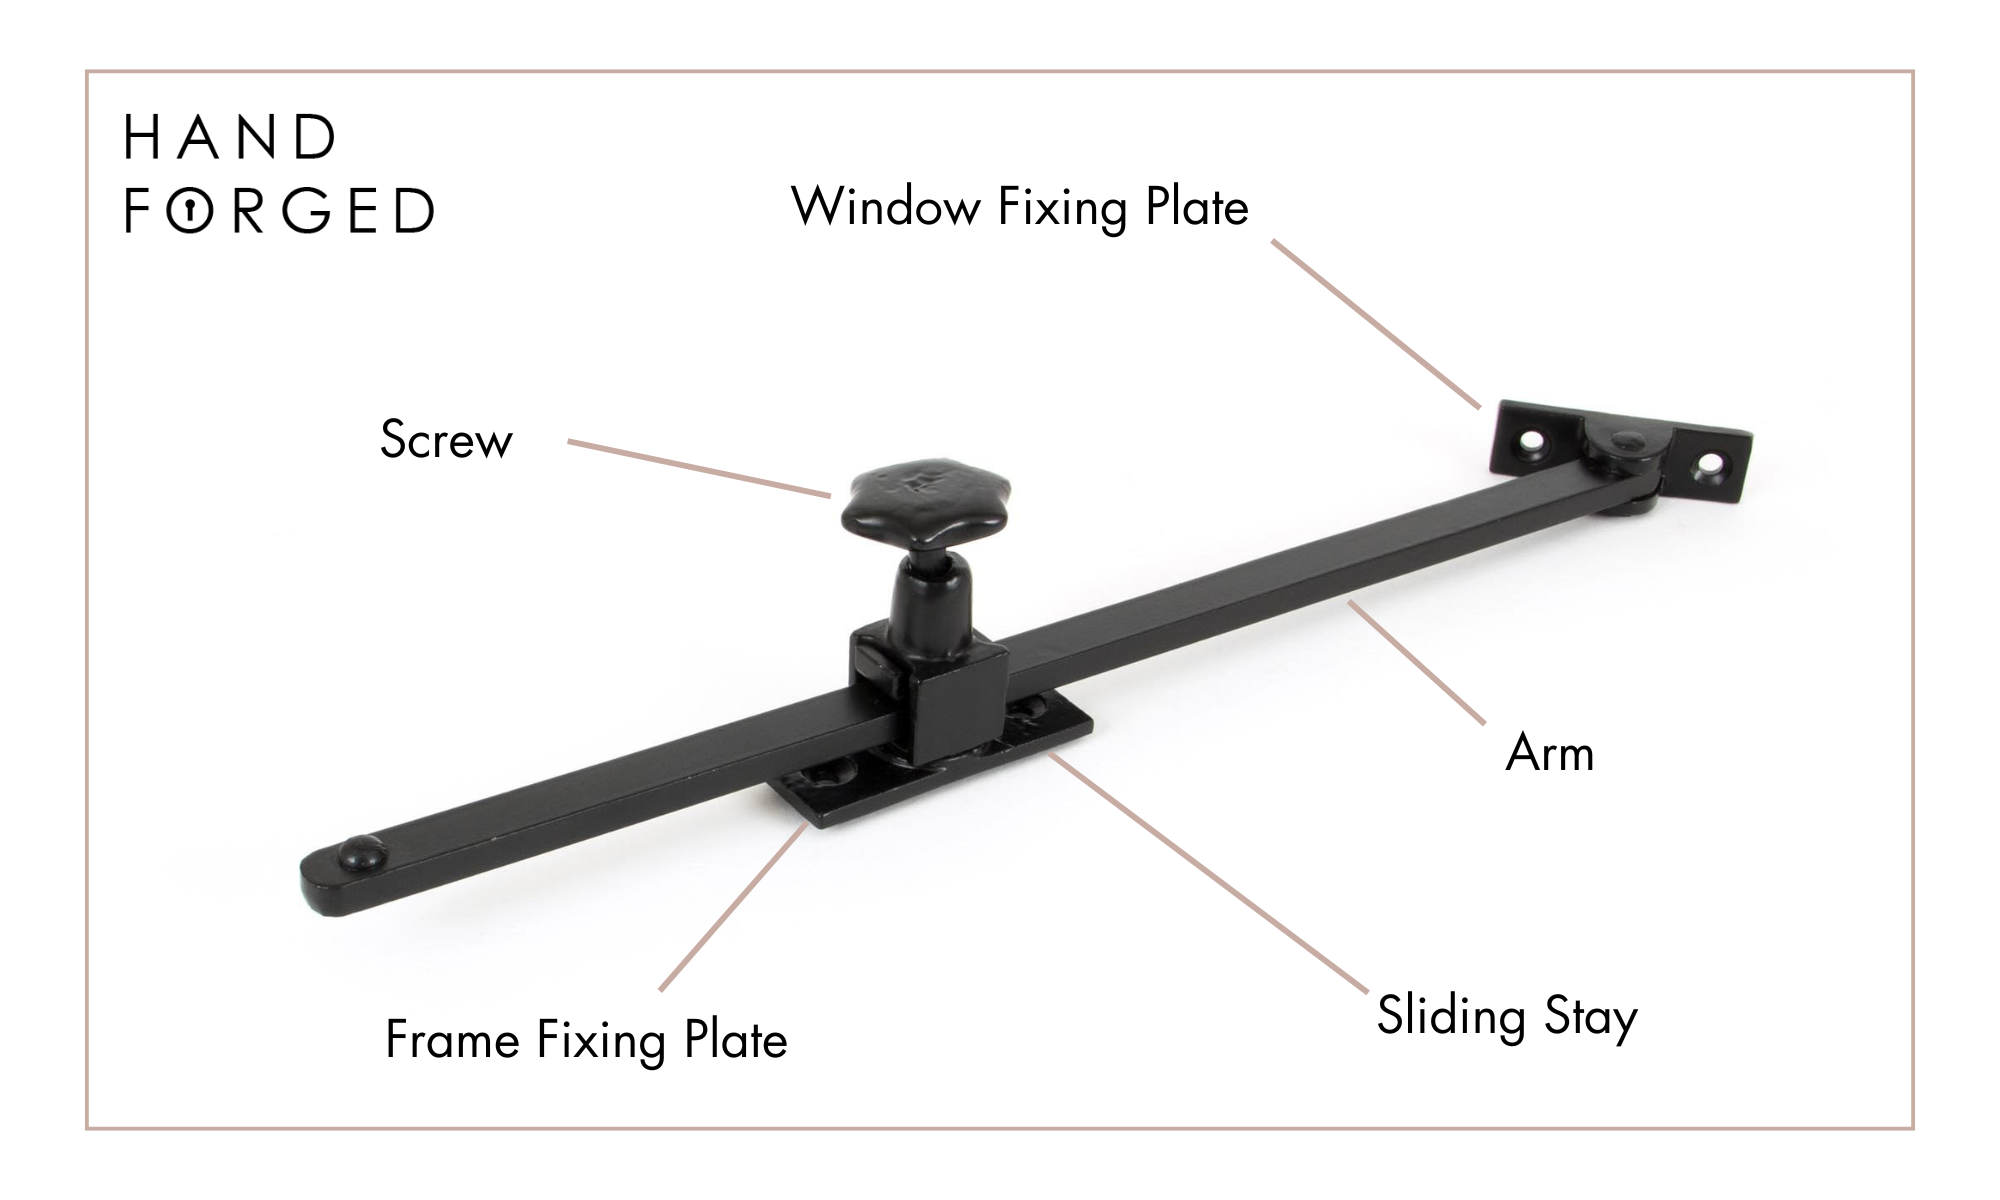 Diagram of From The Anvil's Black sliding casement window stay with arrows pointing to the screw, frame fixing plate, arm, sliding stay, and window fixing plate.